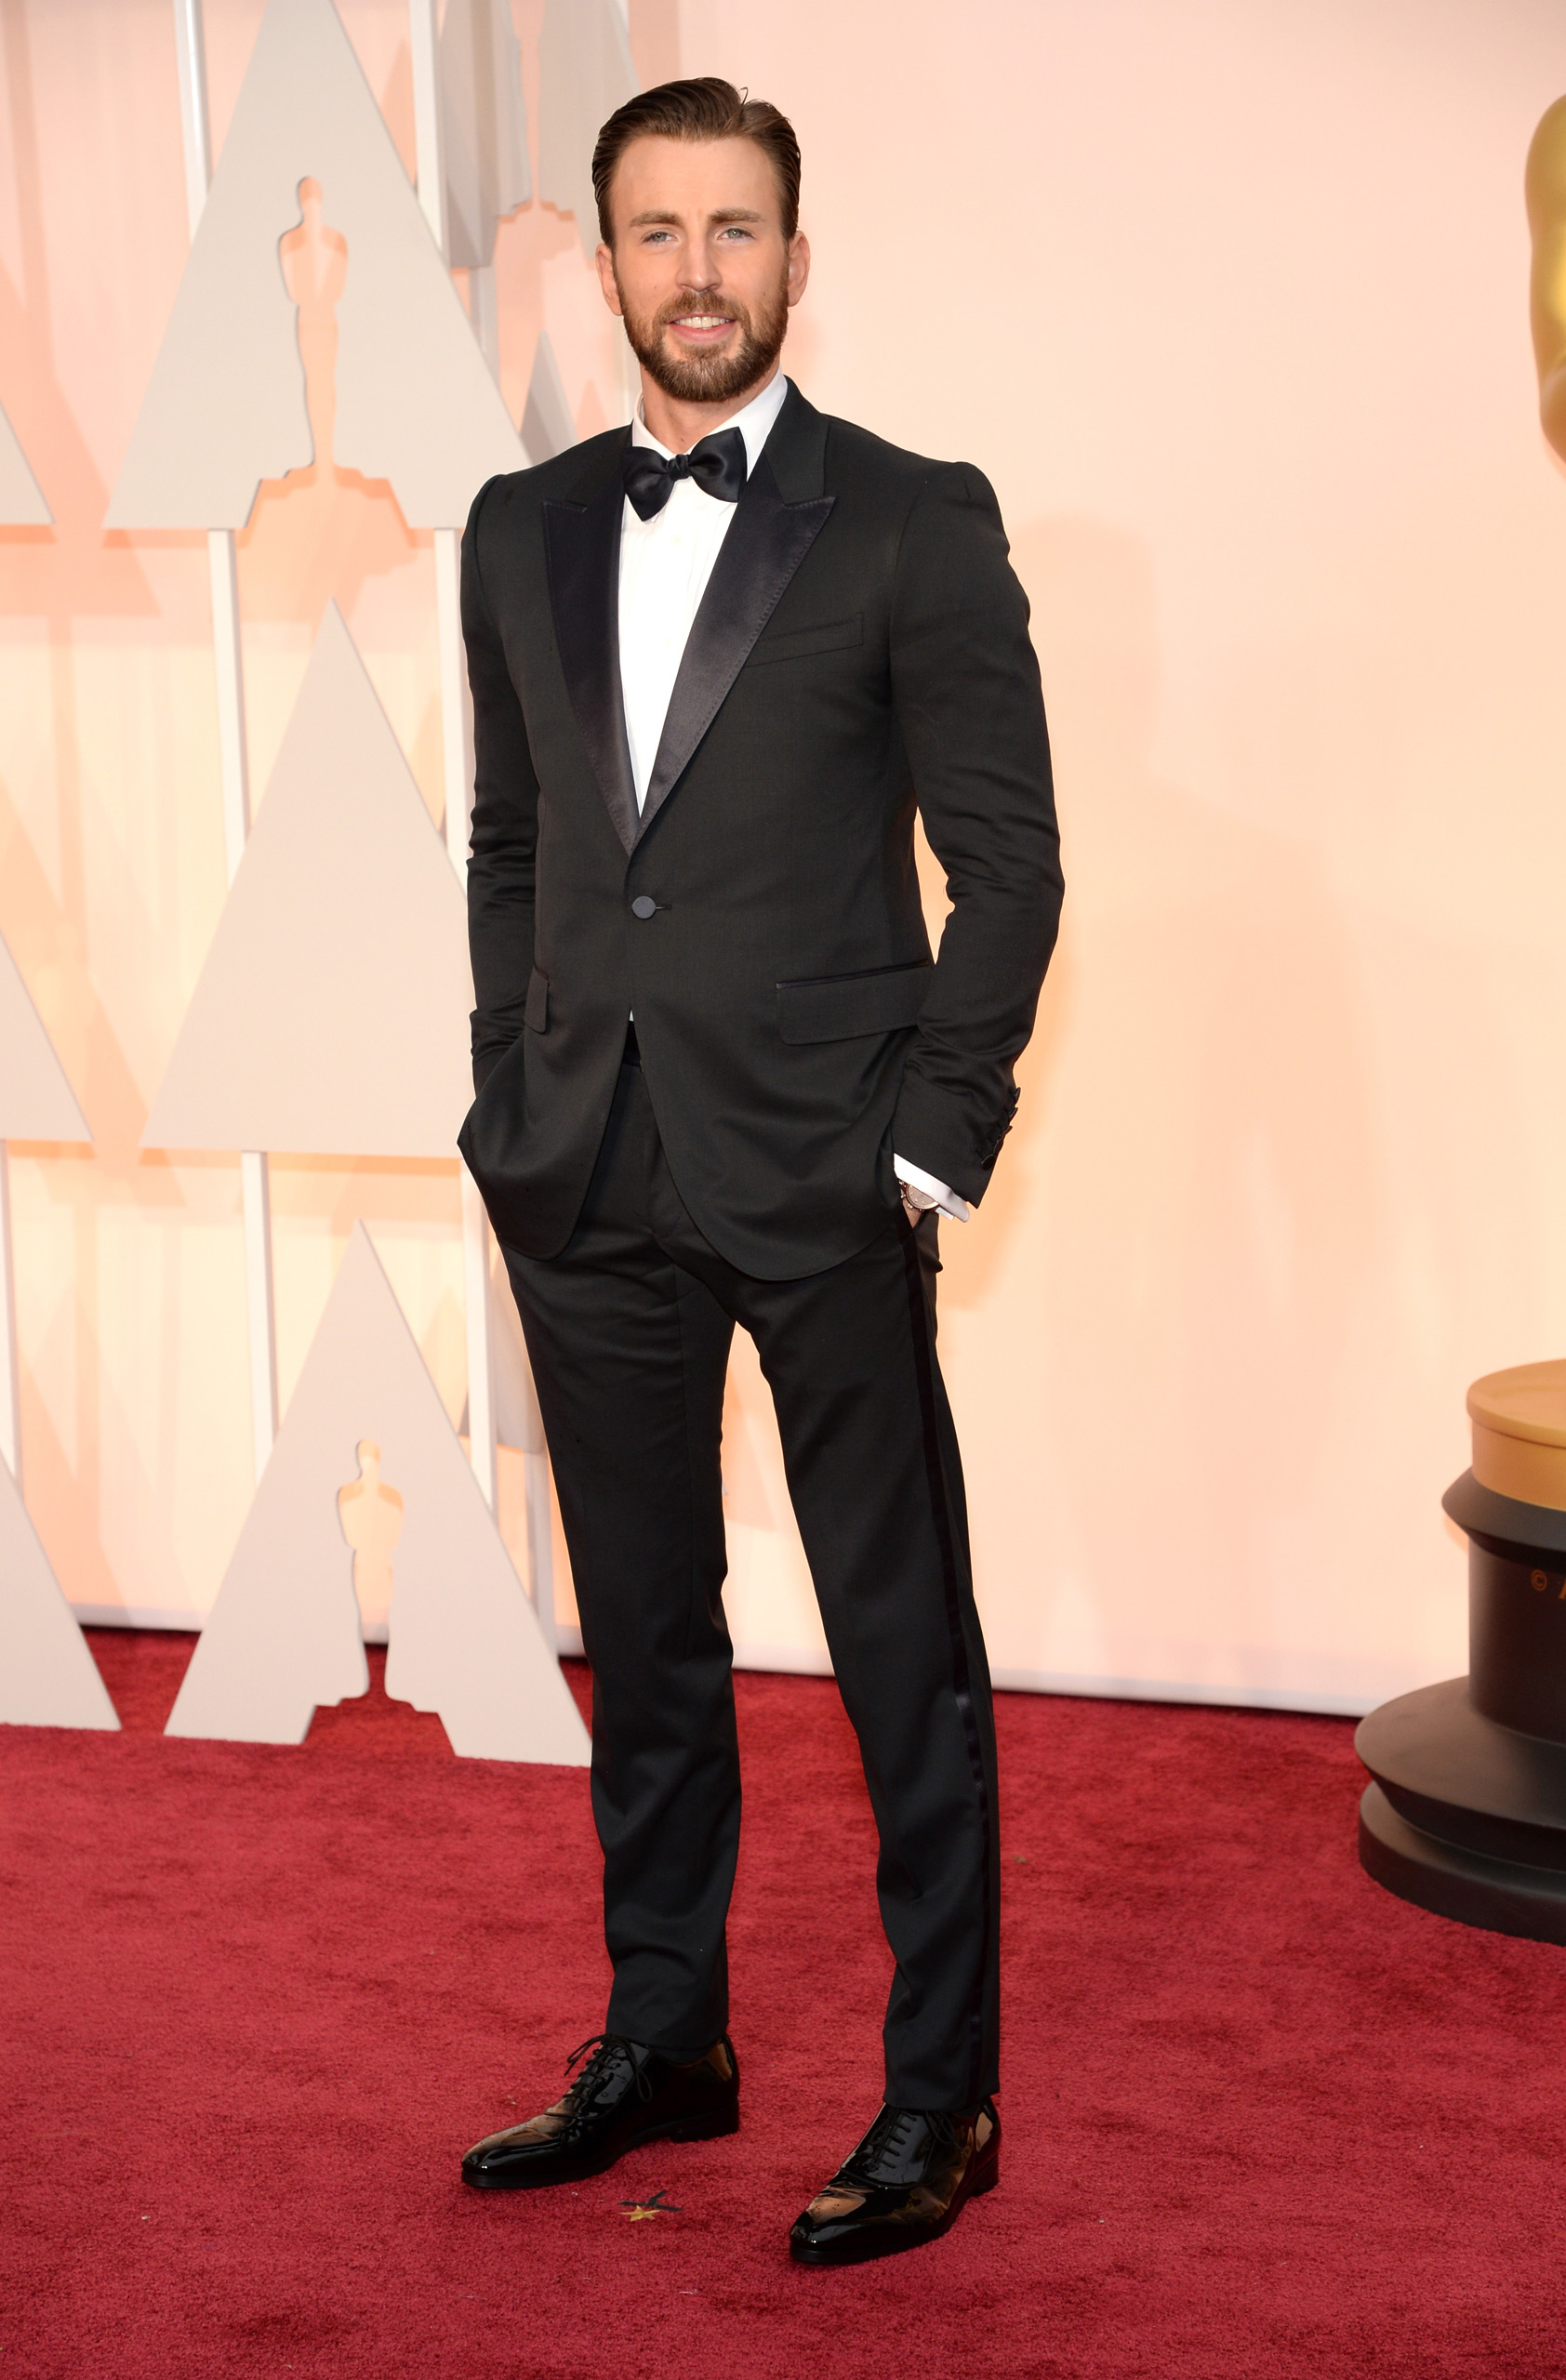 Chris Evans attends the 87th Annual Academy Awards on Feb. 22, 2015 in Hollywood, Calif.